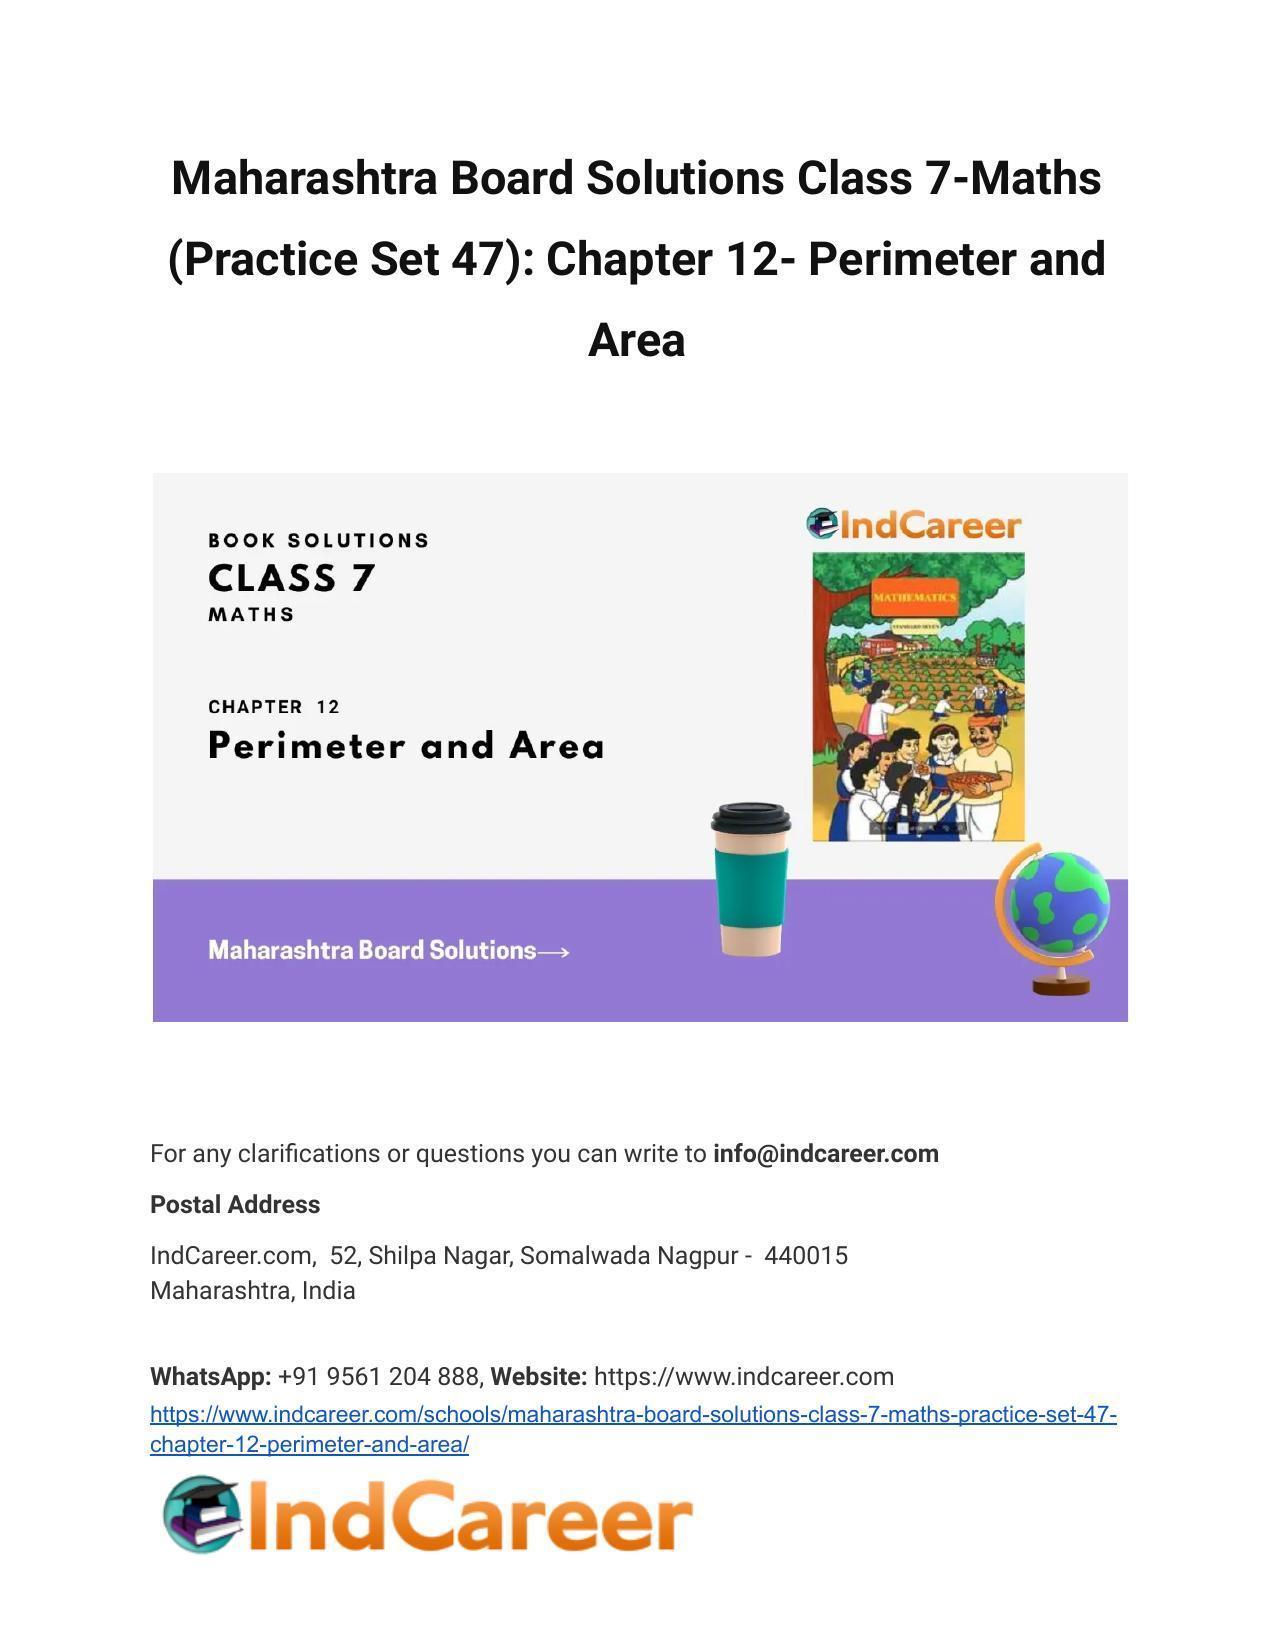 Maharashtra Board Solutions Class 7-Maths (Practice Set 47): Chapter 12- Perimeter and Area - Page 1